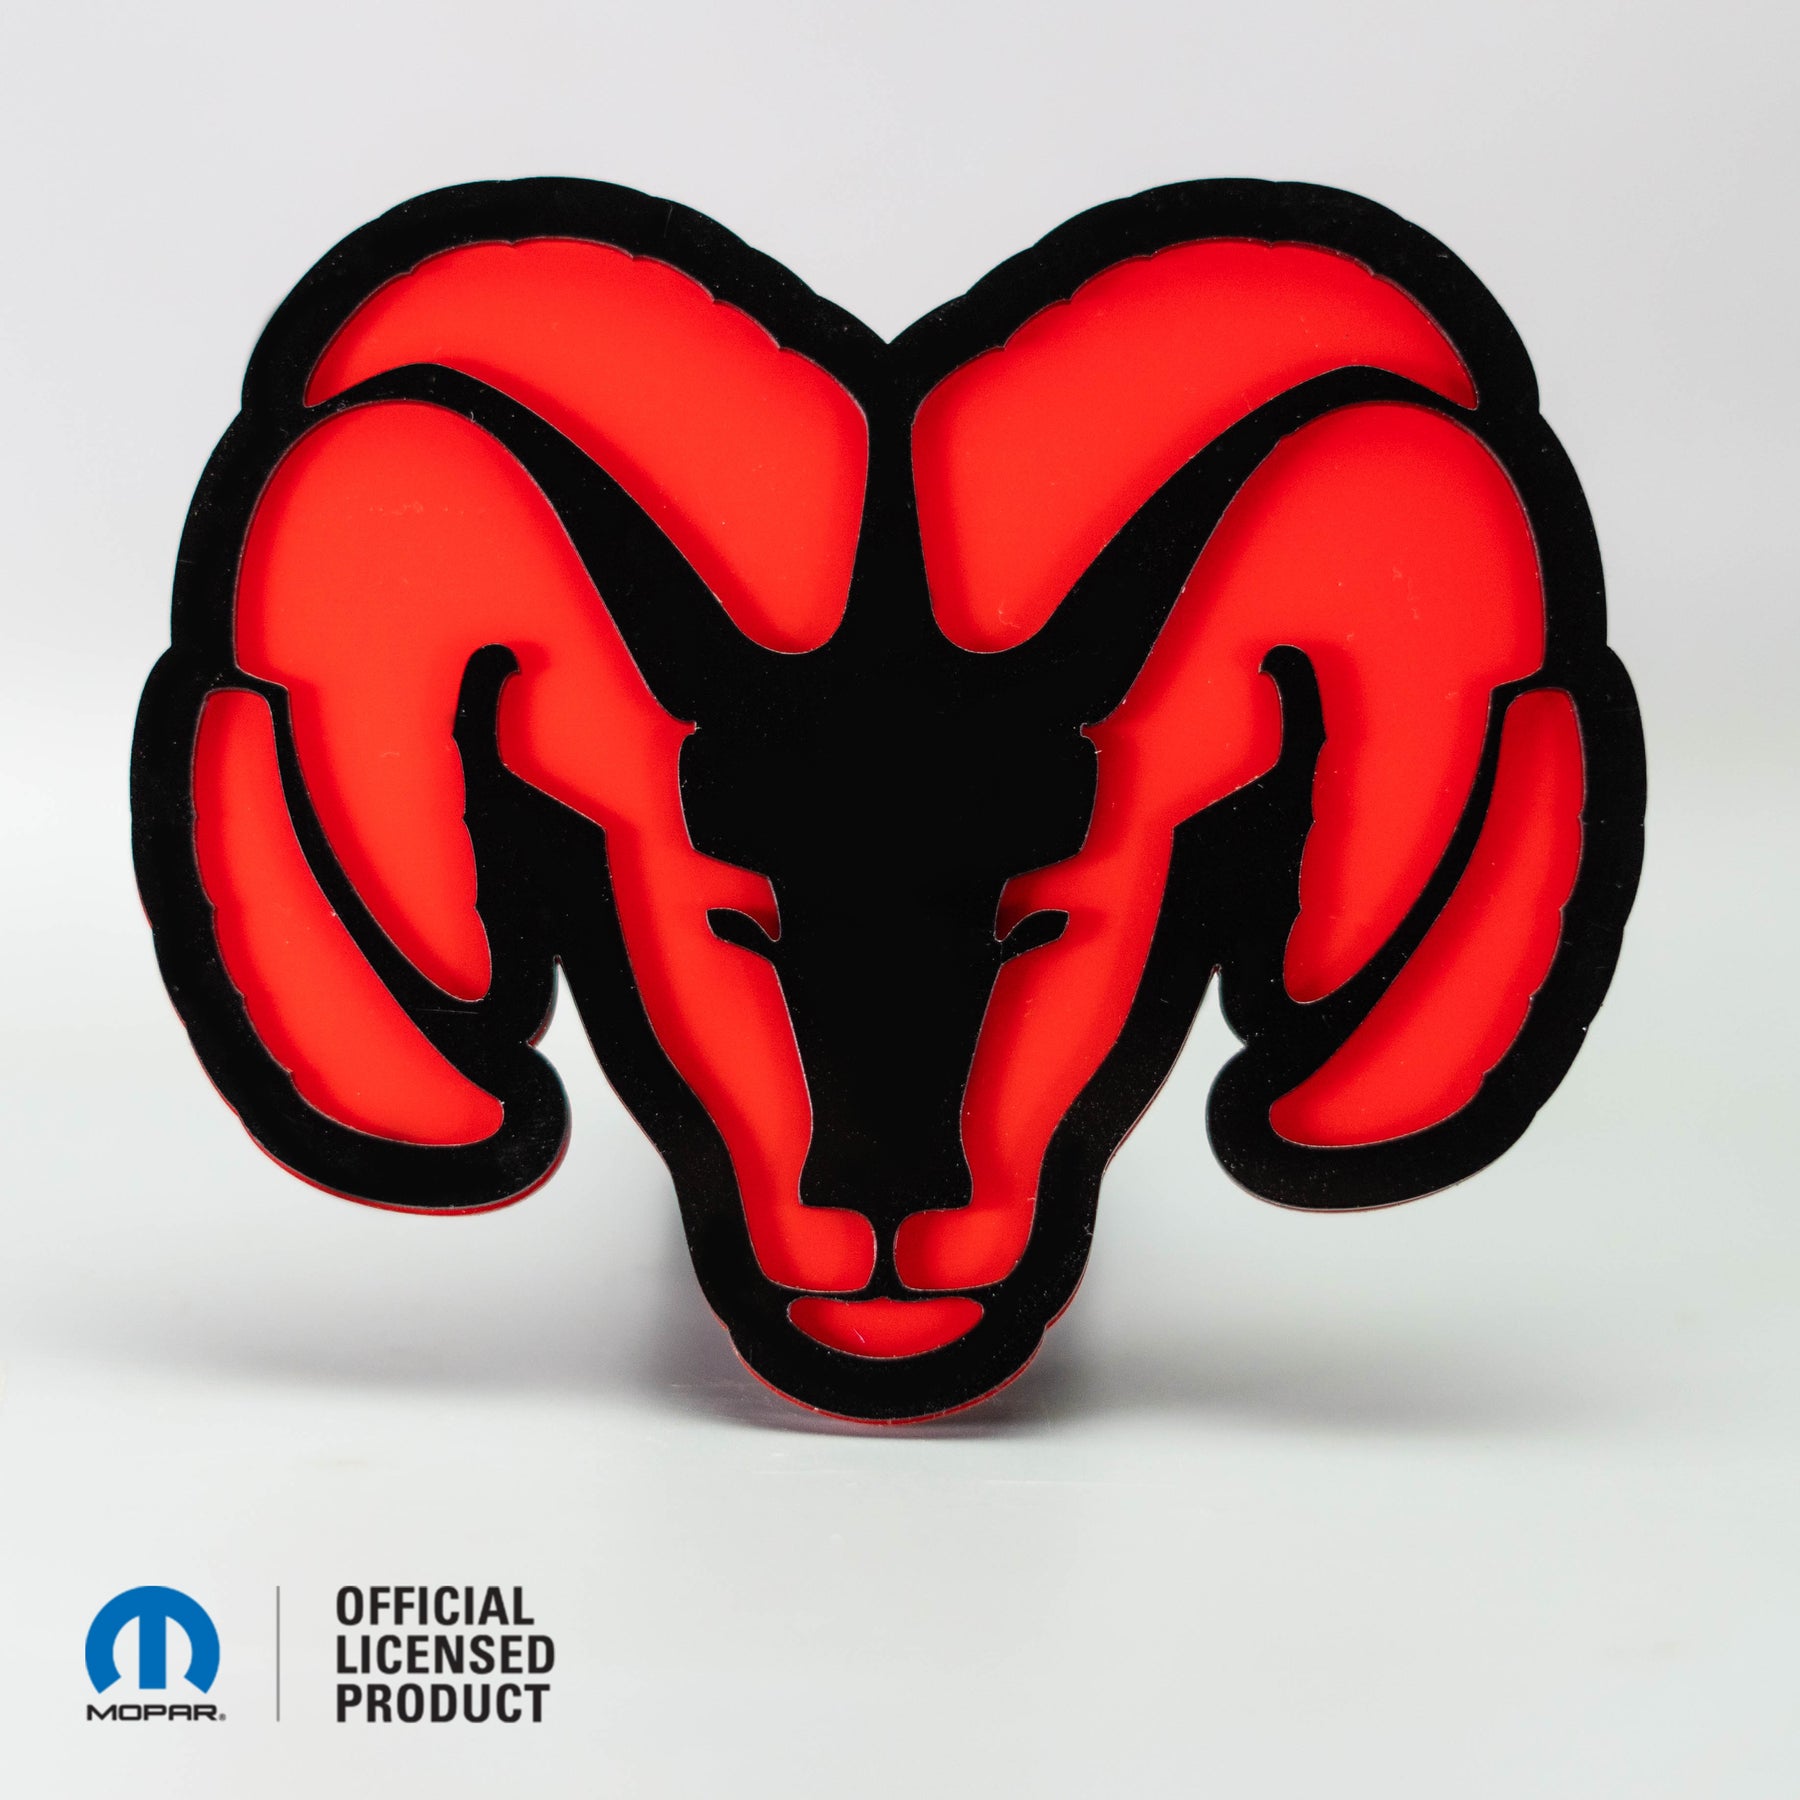 RAM® HEAD LOGO STYLE 2 - HITCH COVER - Gloss on Red - Officially Licensed Product